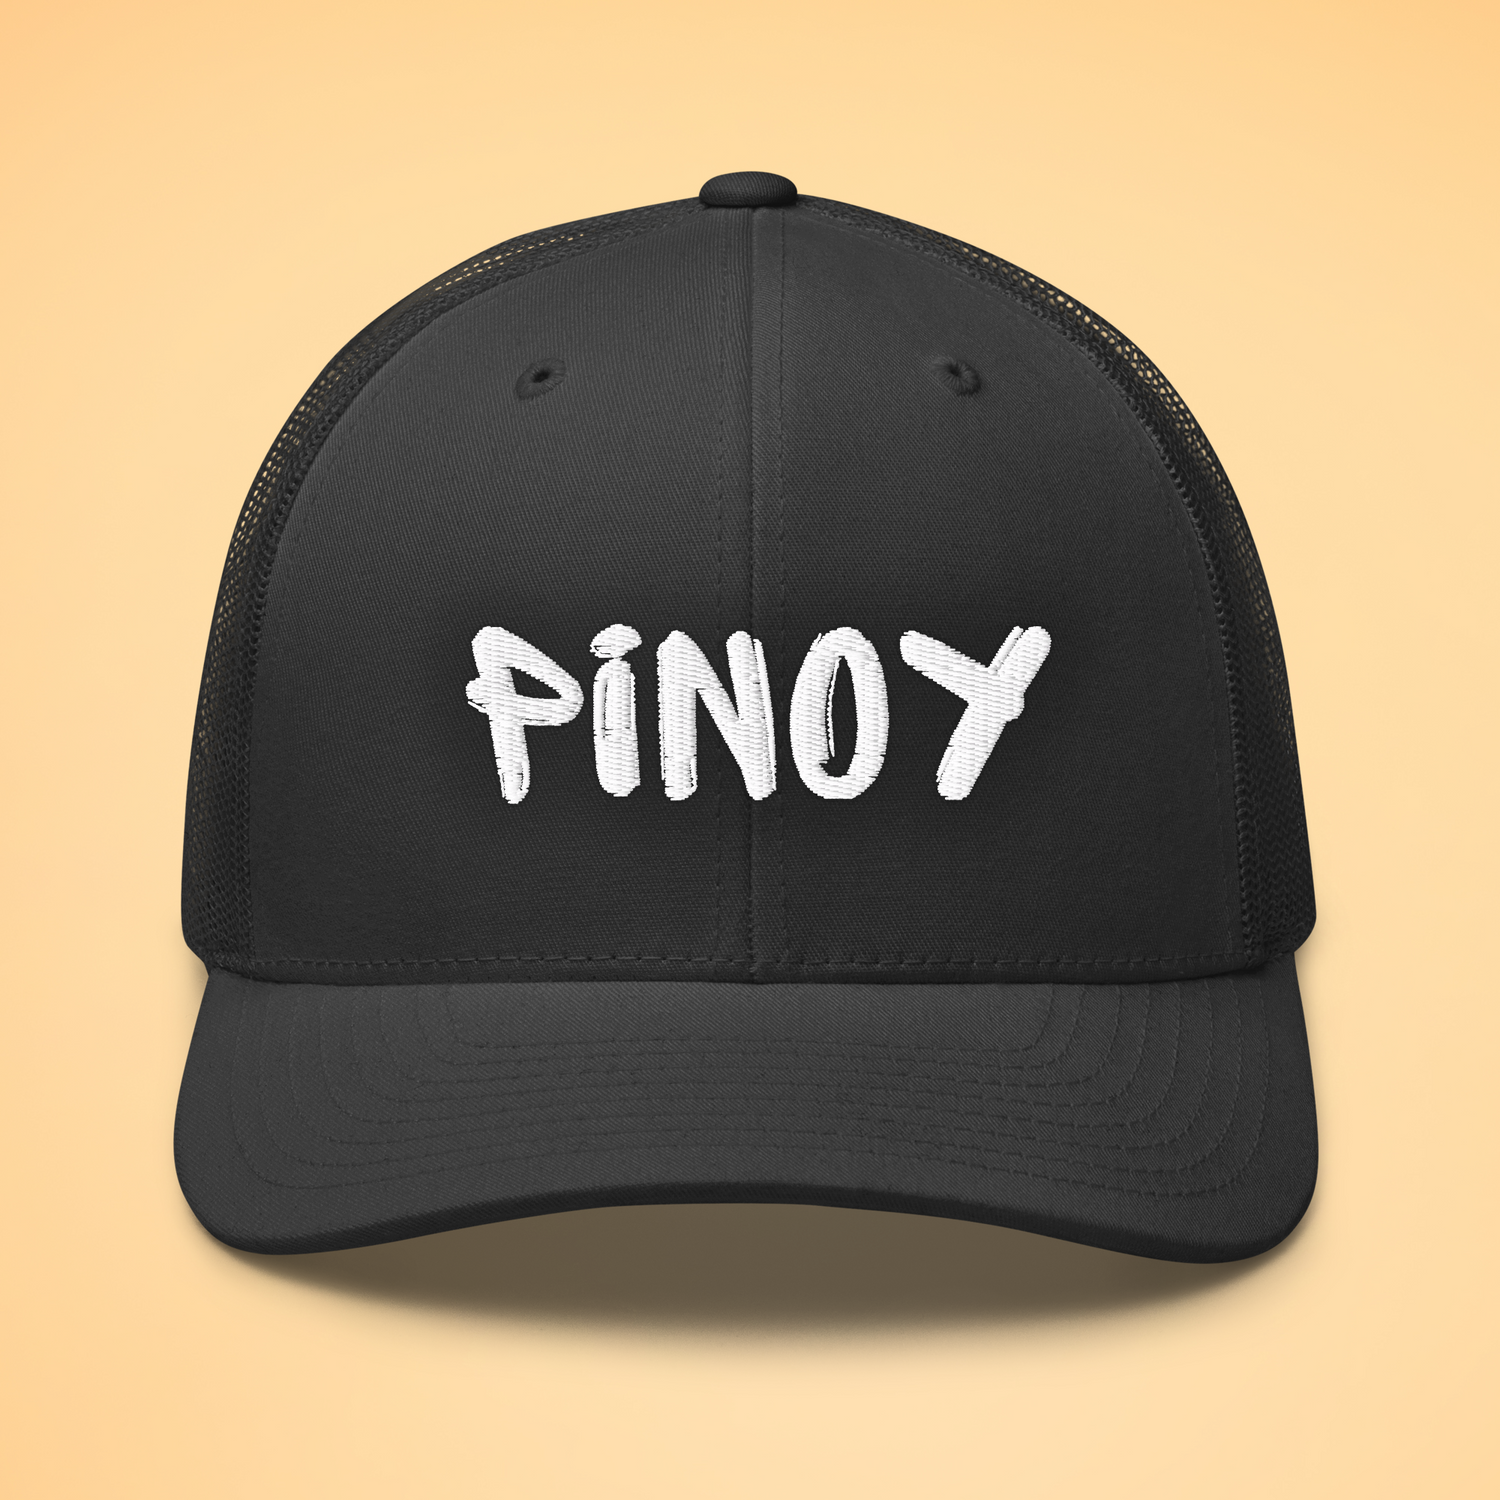 Filipino Pinoy Embroidered Mesh Back Trucker Cap in Black